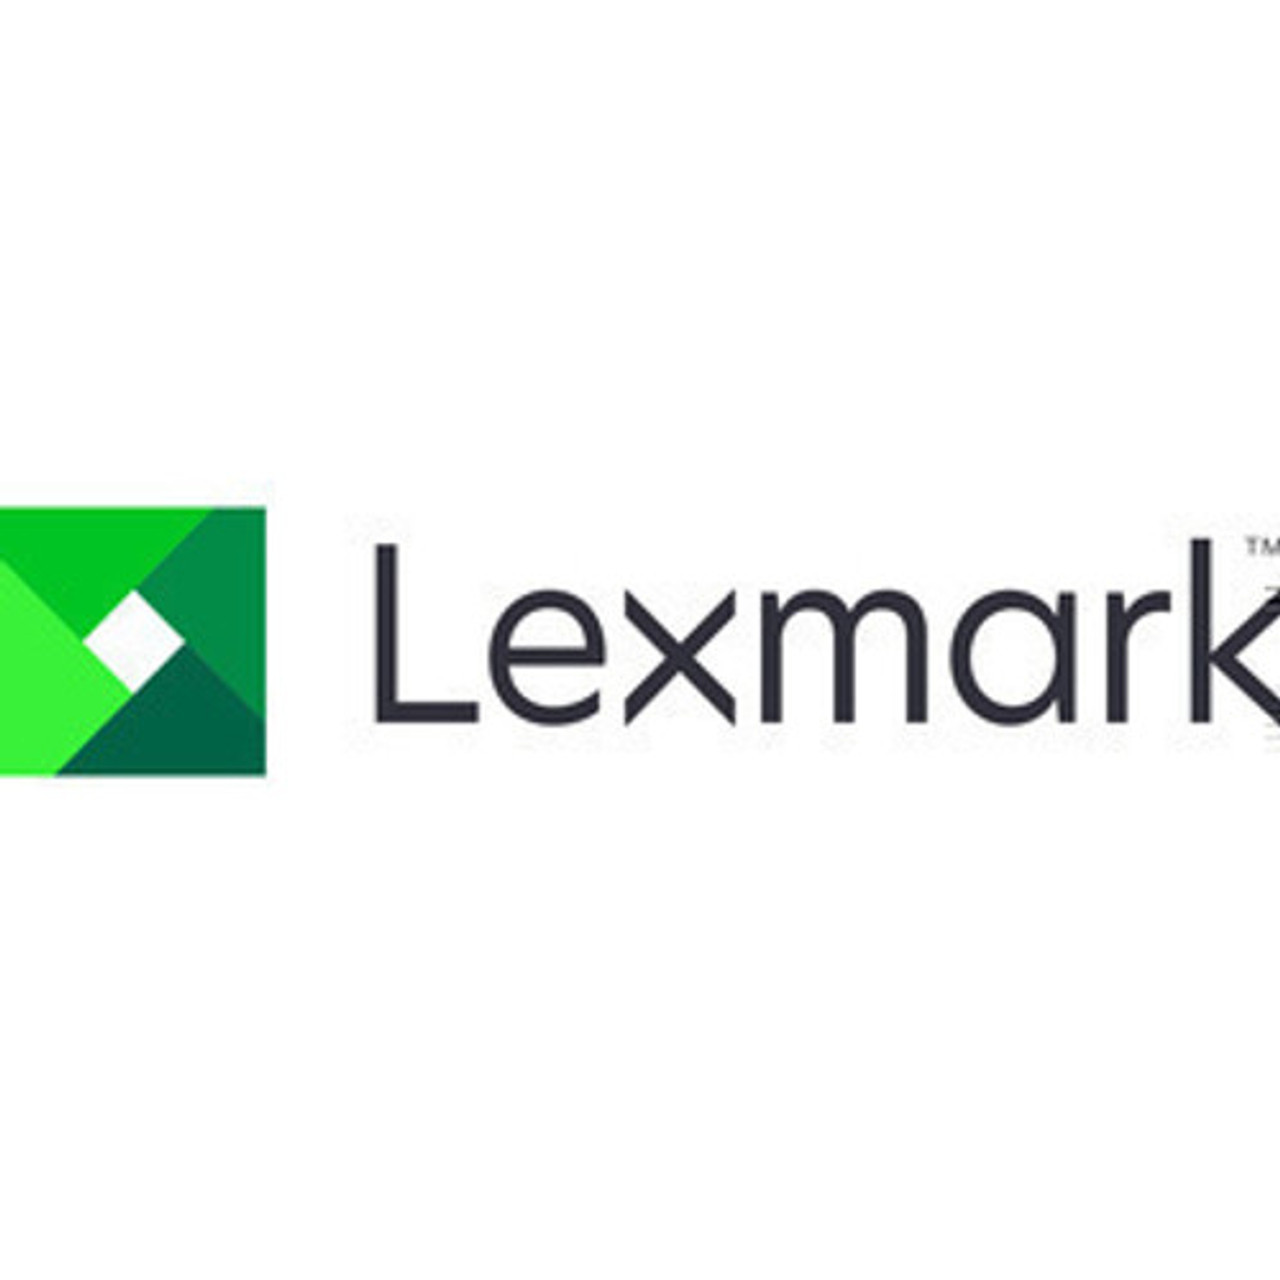 Lexmark 2 YEAR PARTS ONLY - RENEWAL - MX331 - 2372027